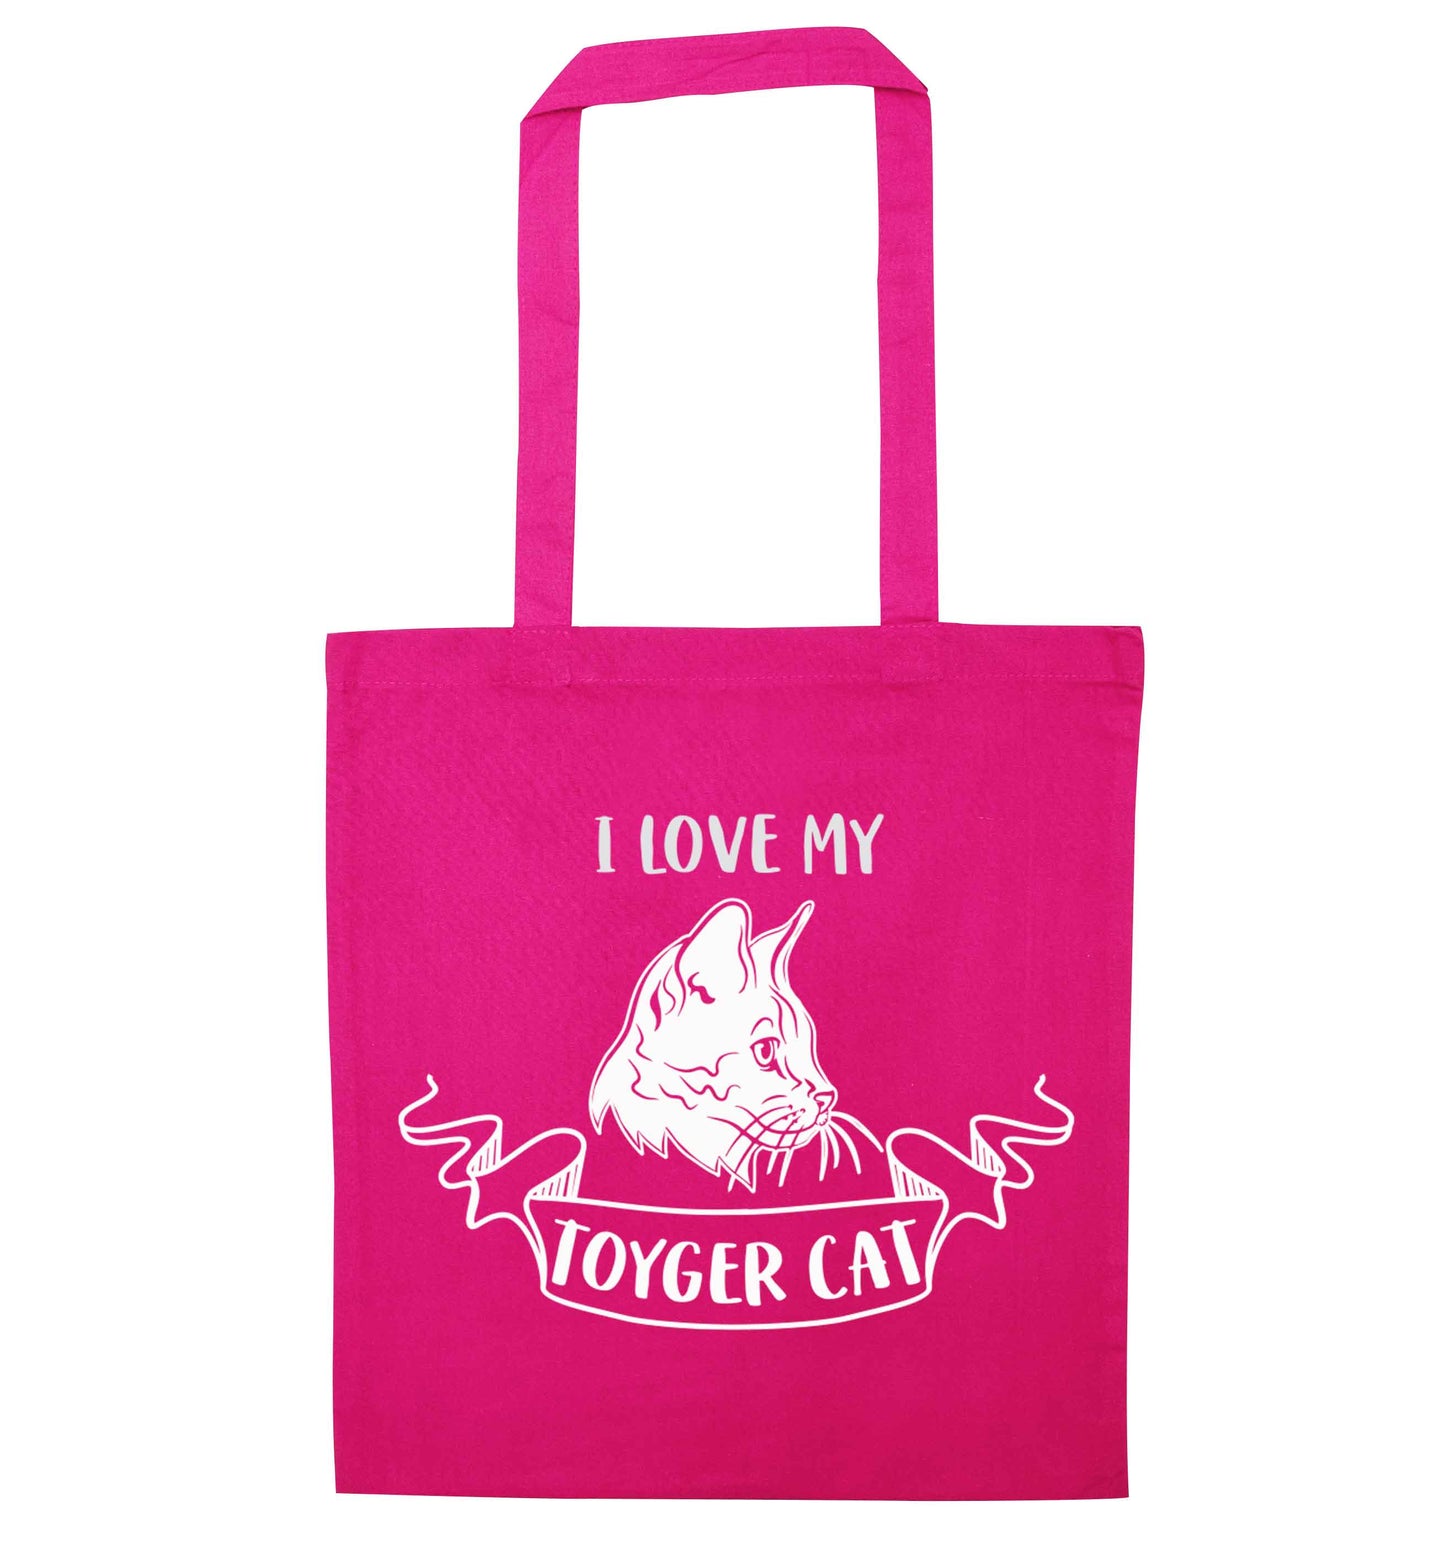 I love my toyger cat pink tote bag